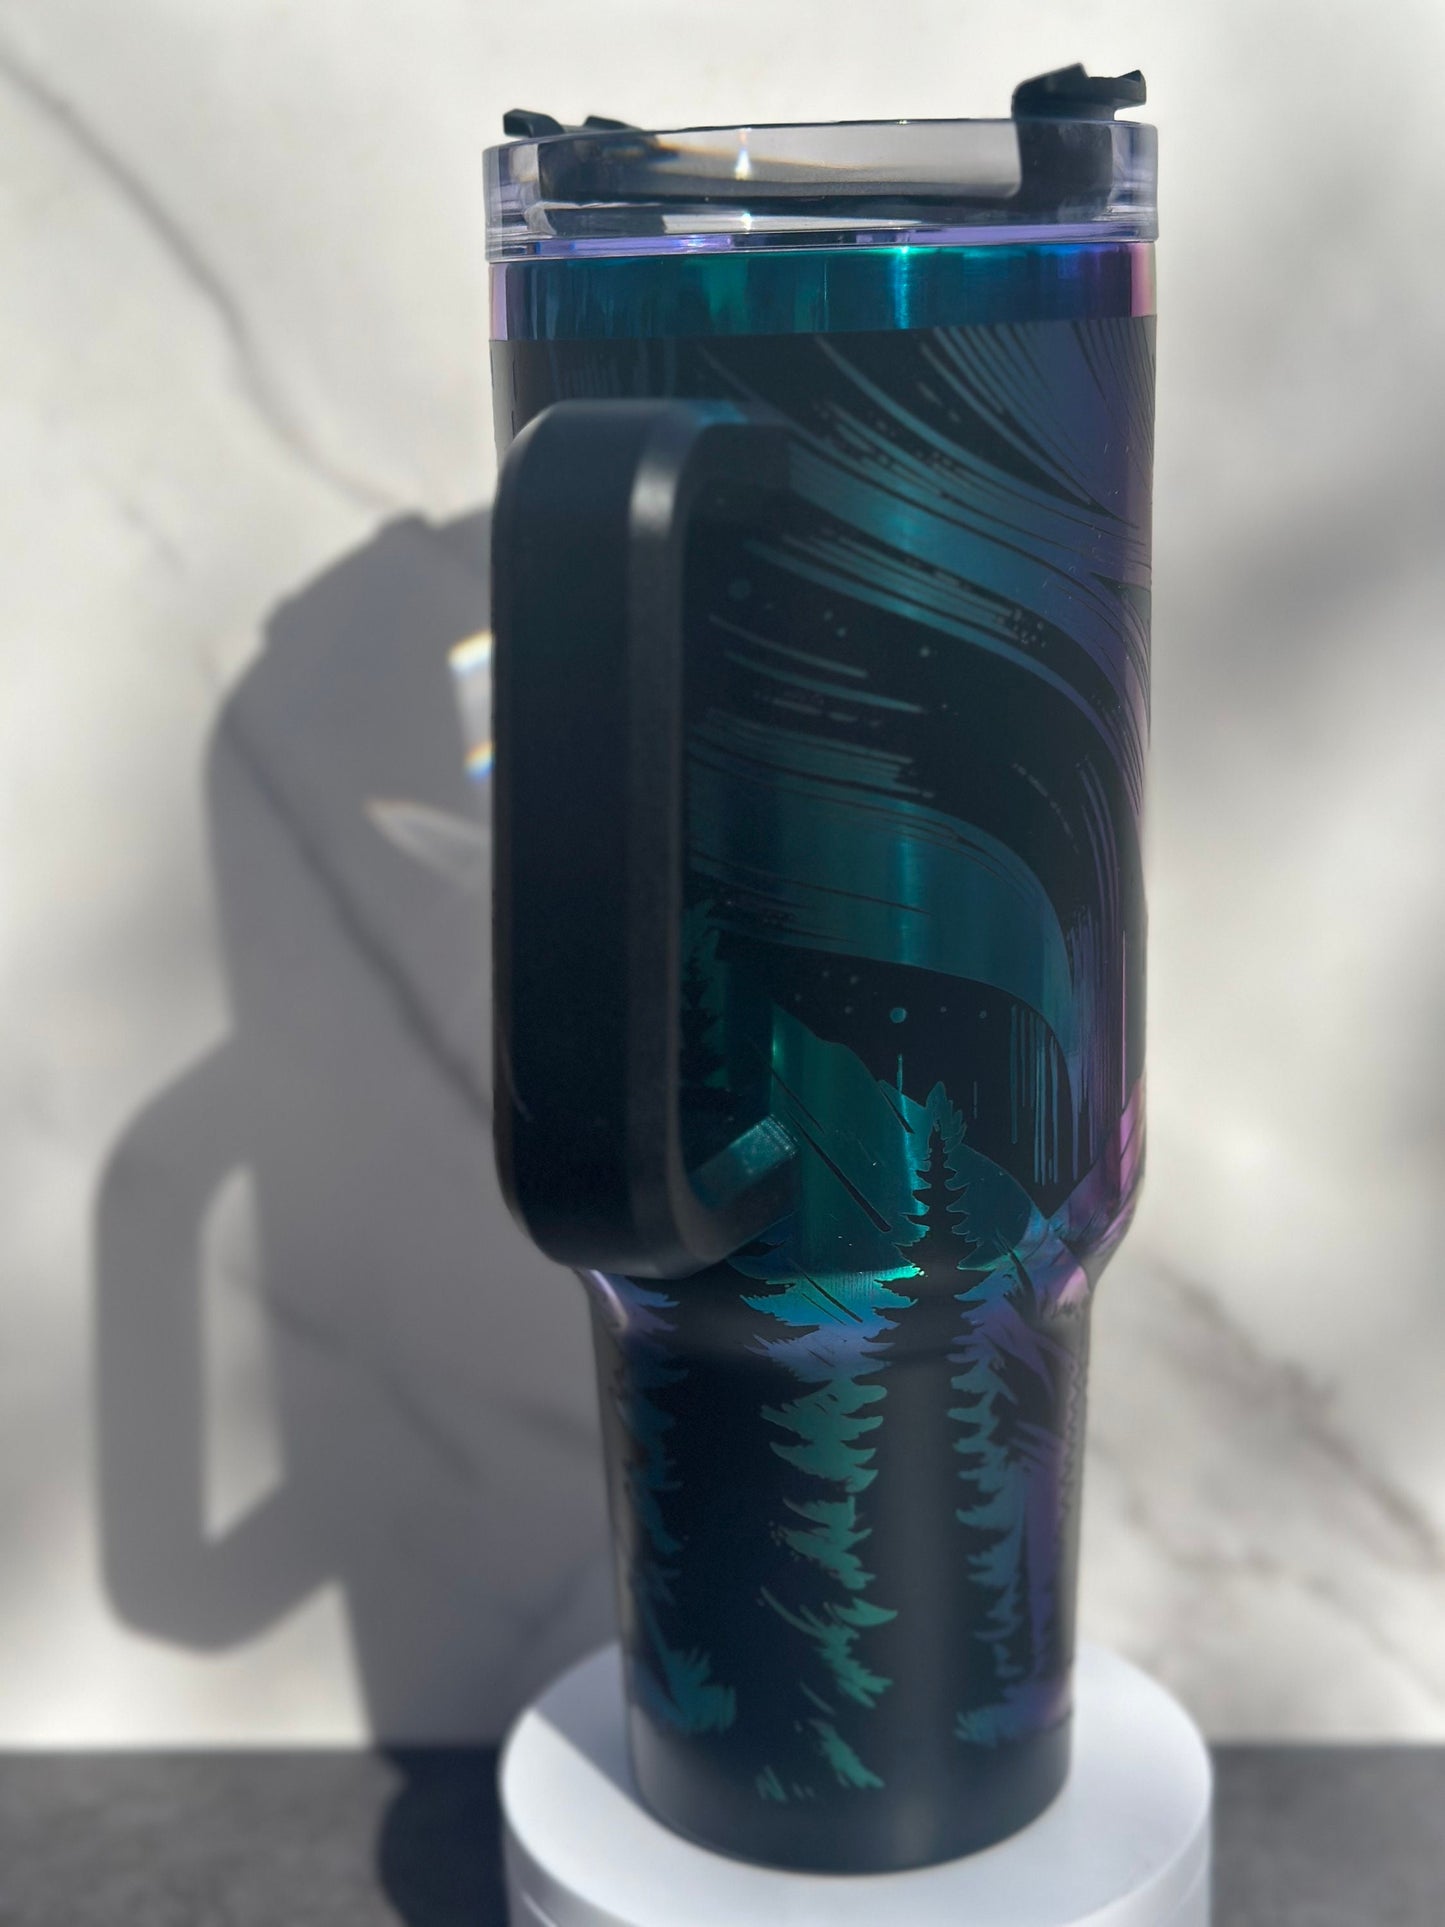 Northern Lights Engraved Tumbler with Handle, 40oz Black and Rainbow/Aurora, Mountains with Aurora Borealis, Laser Engraved